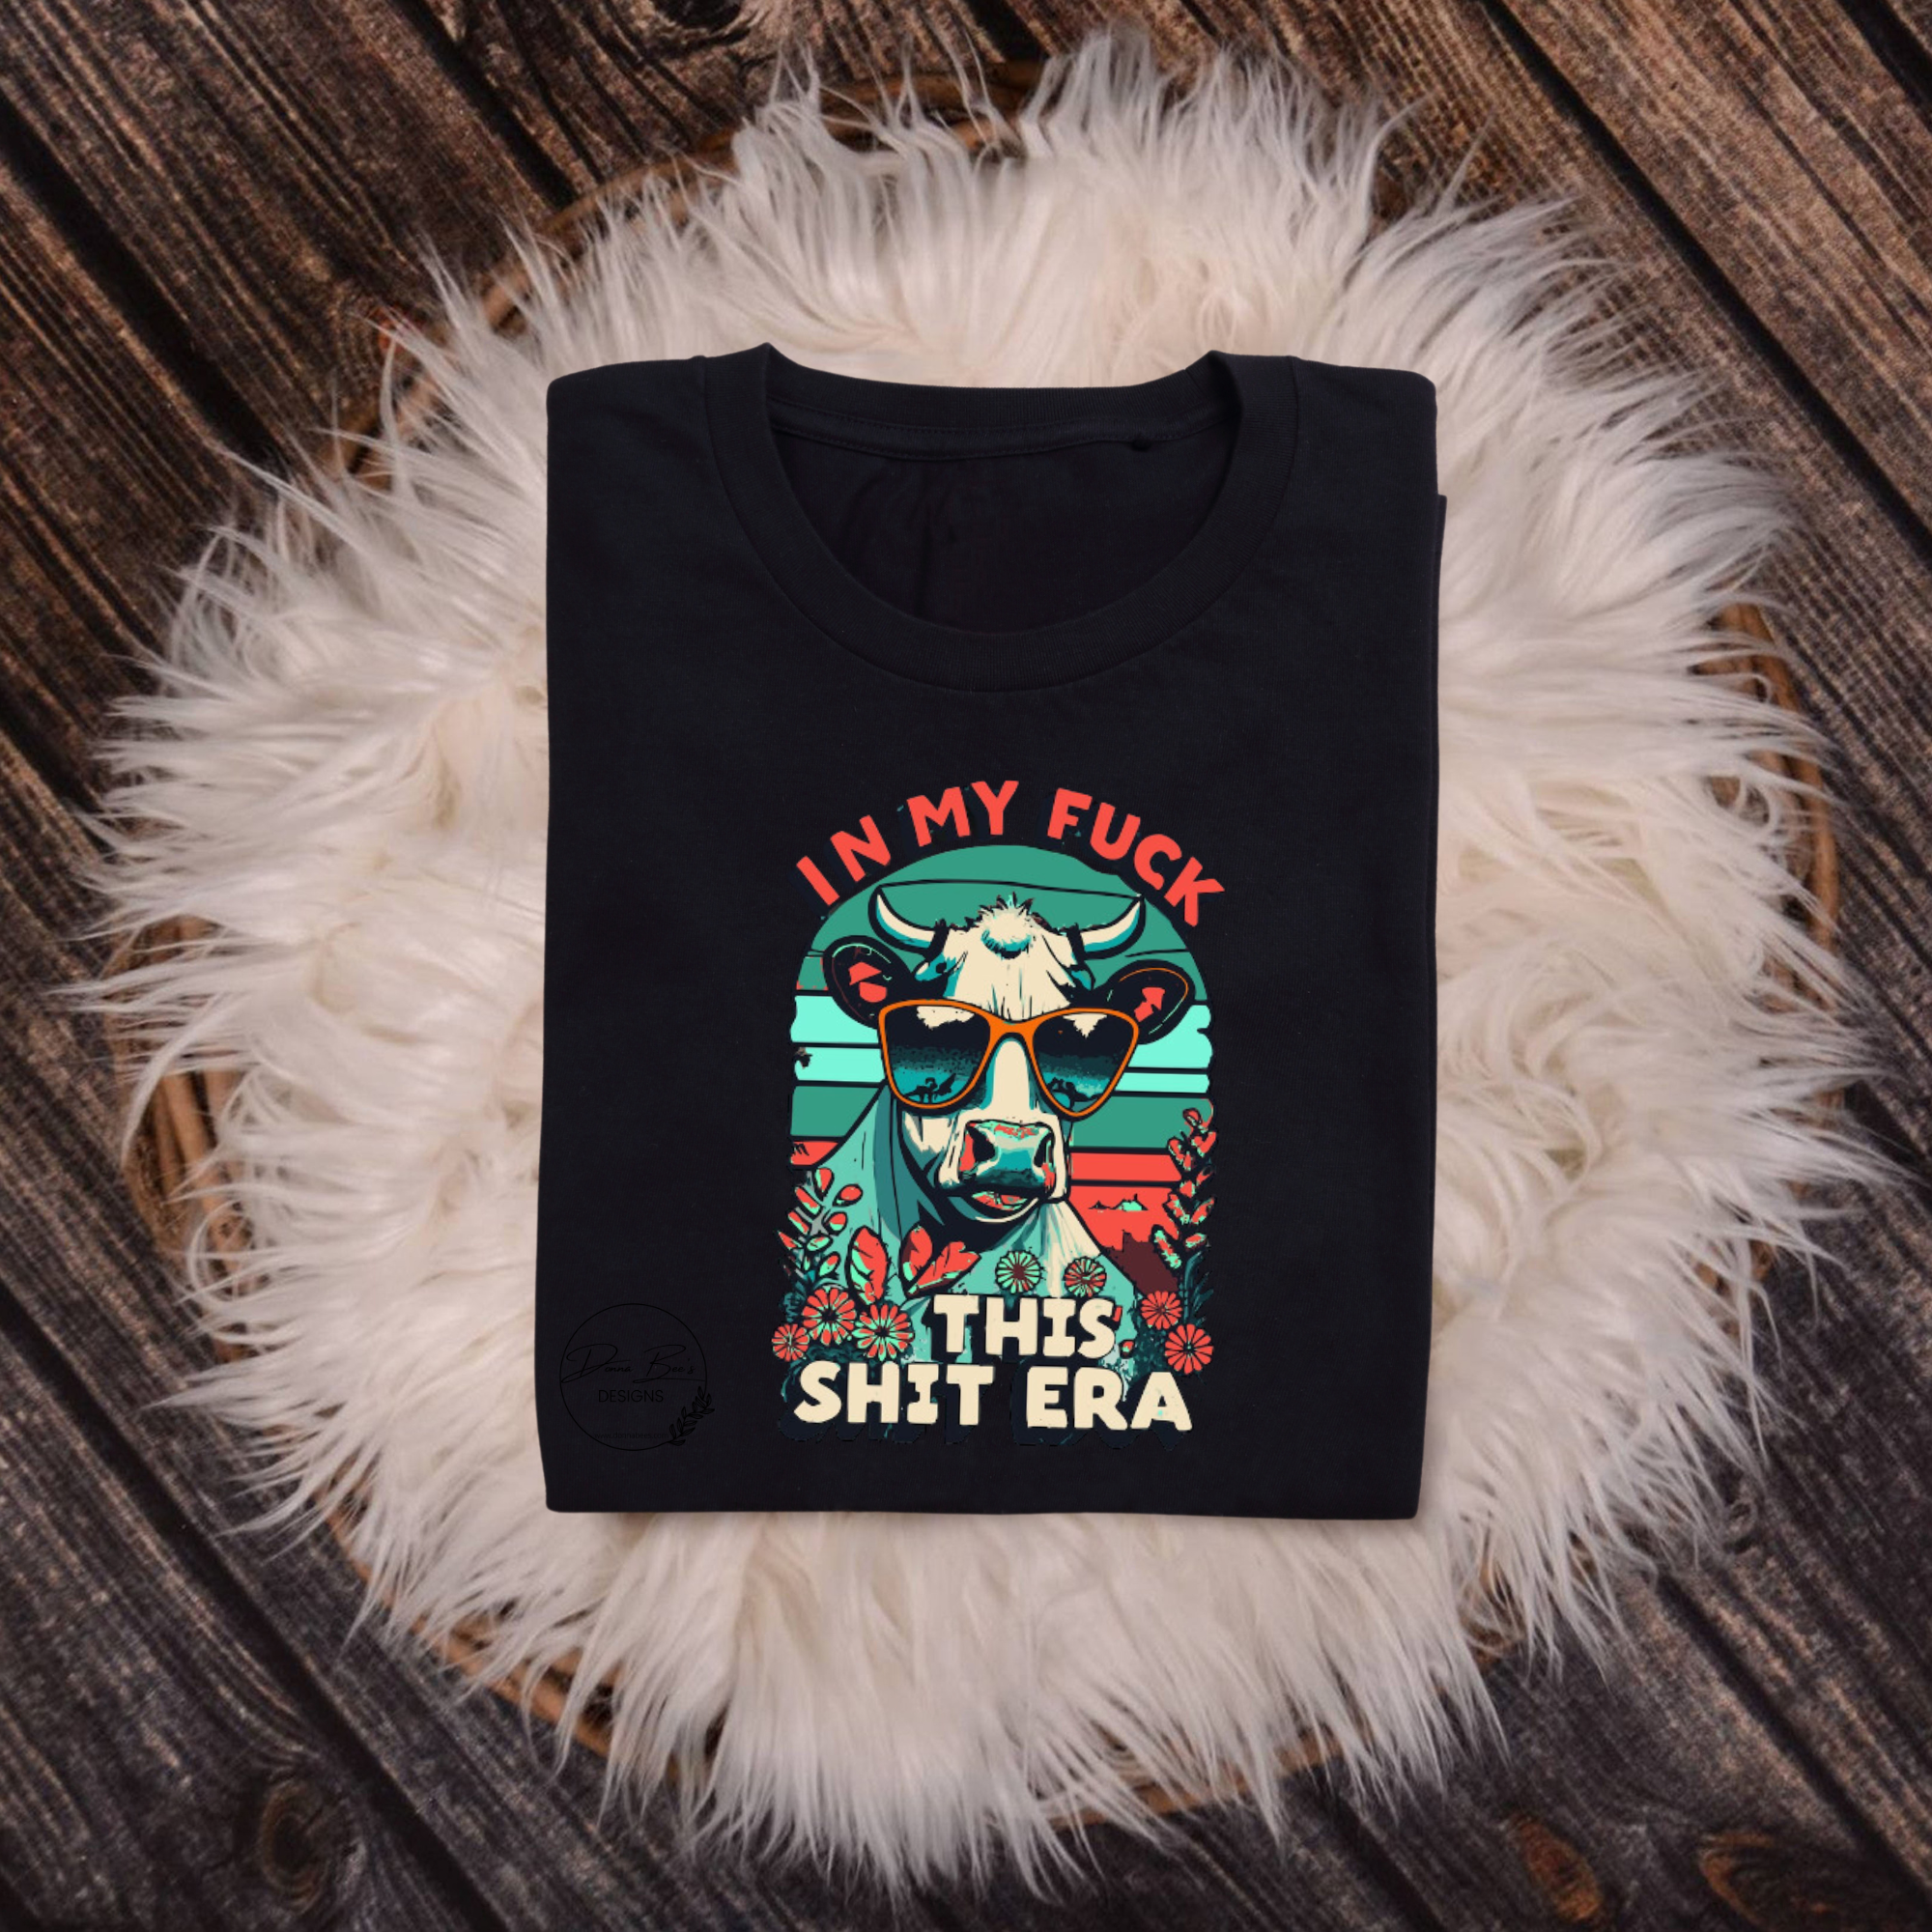 In my Fuck this shit era | Funny Tee